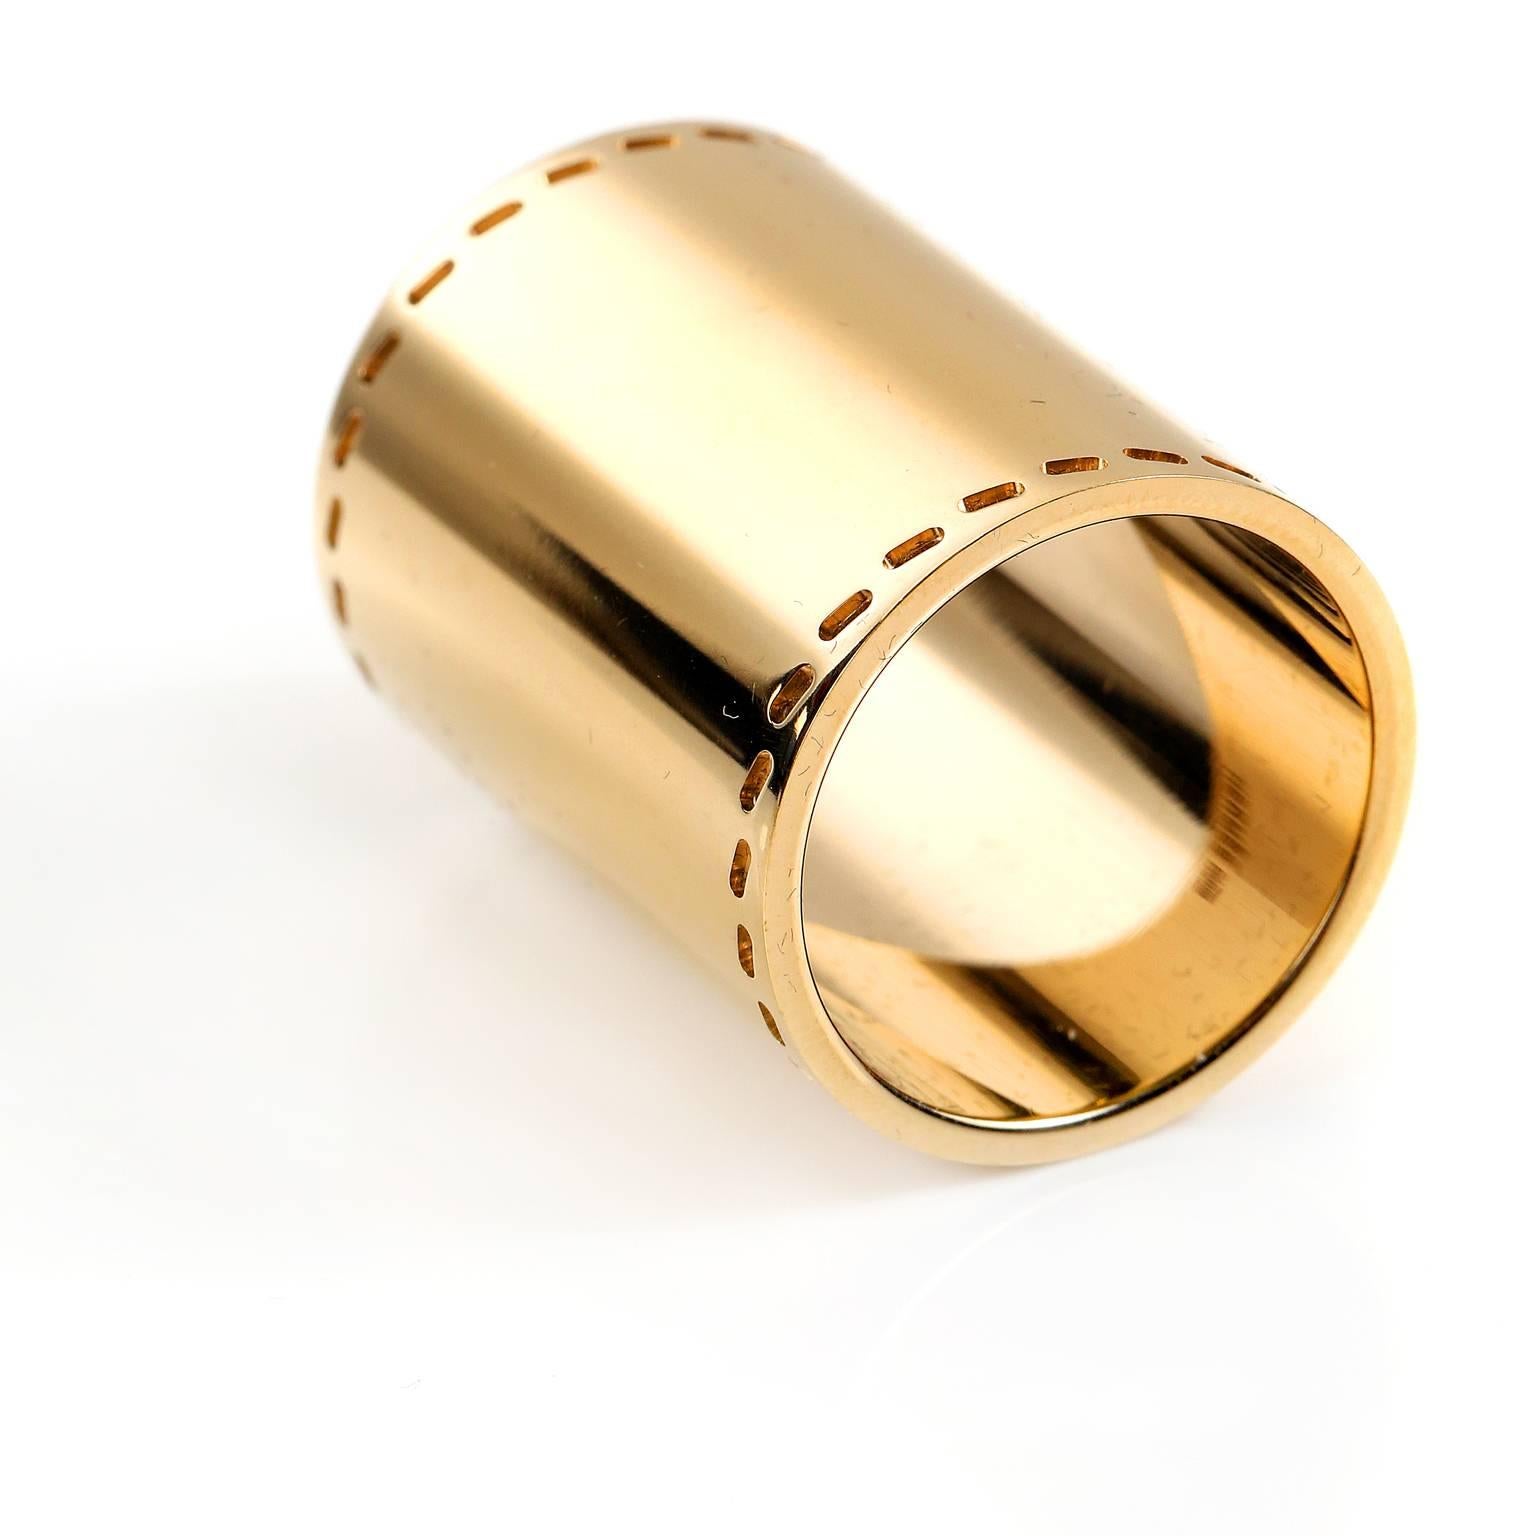 Hermès Gold Tone Scarf Ring is in mint condition. 
Elegant and simple design adds panache to any scarf.
A261
